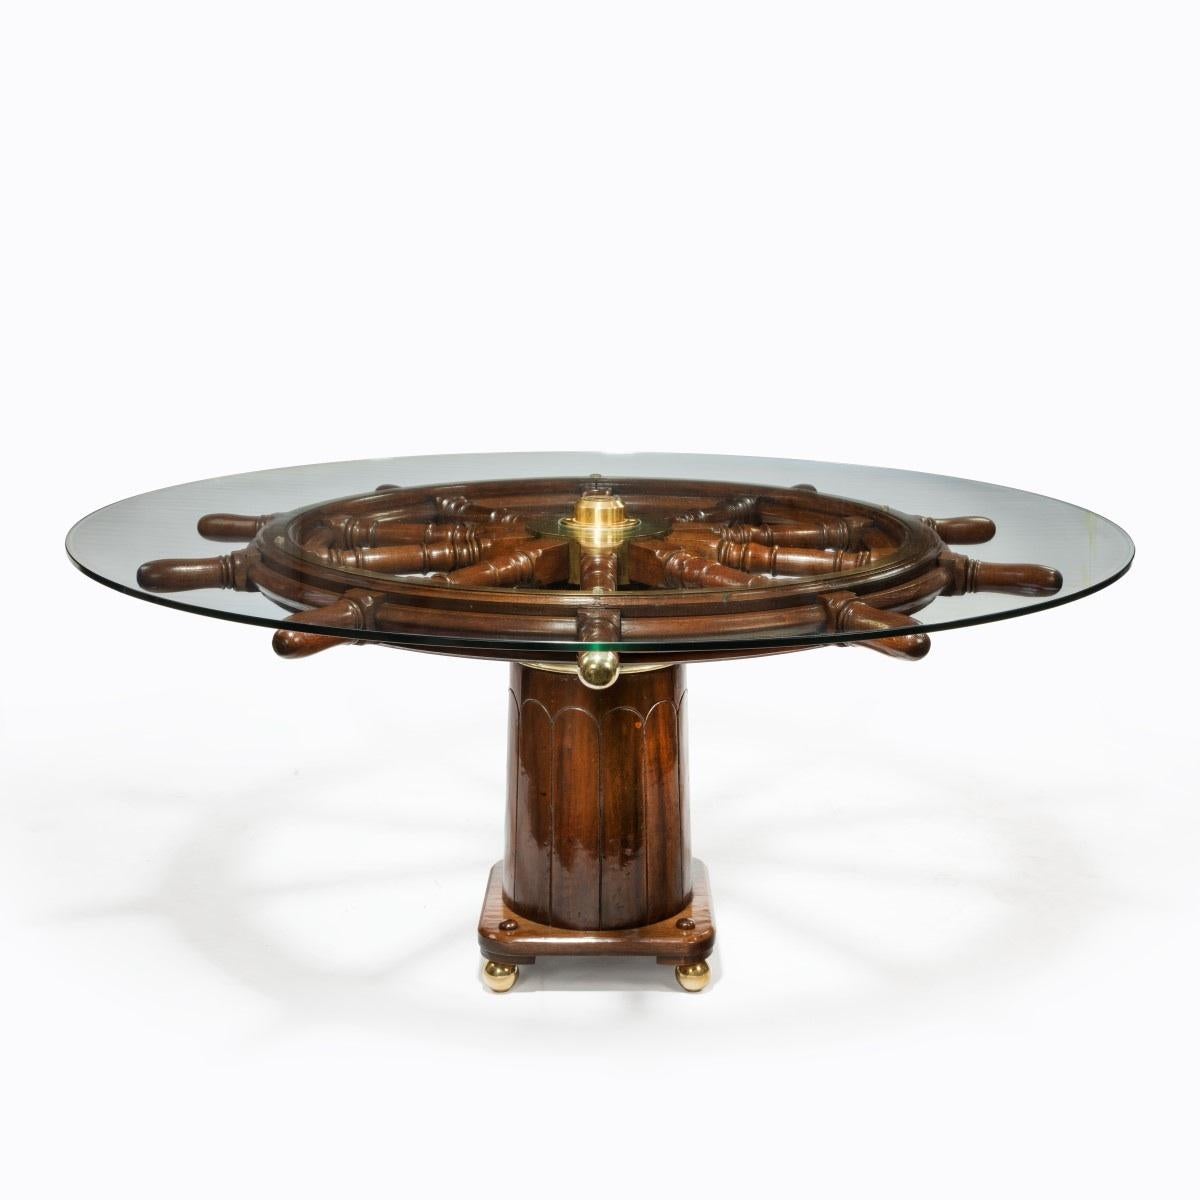 A dining table made from a 19th century ship's steering wheel, upon an antique binnacle with bronze feet, English, circa 1850.
With a modern glass top.